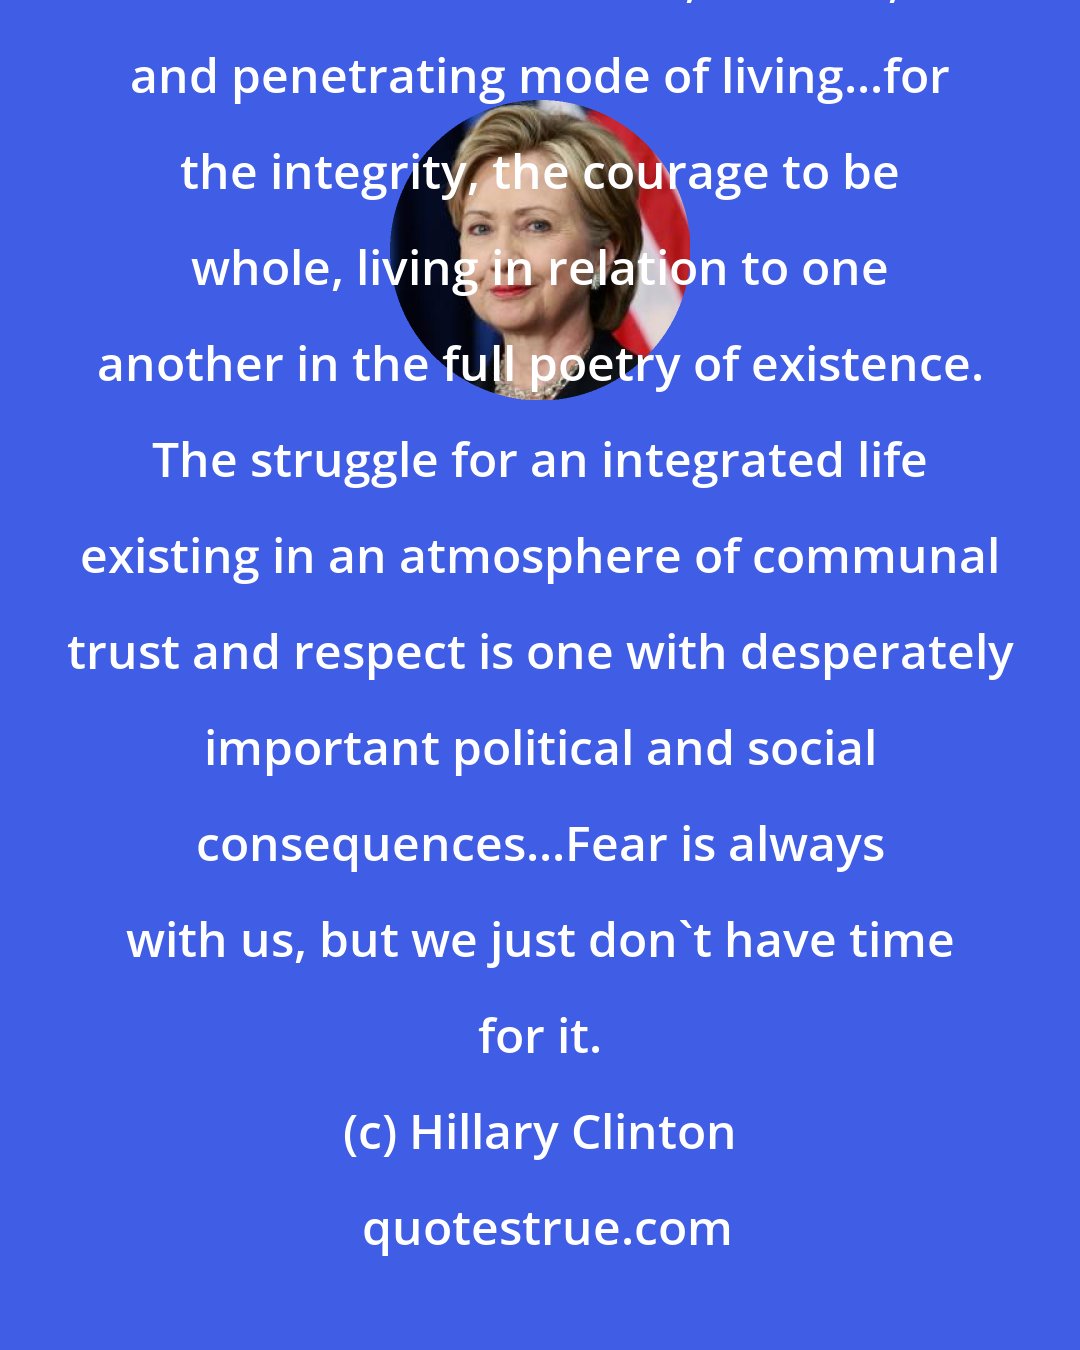 Hillary Clinton: We are, all of us, exploring a world none of us understands...searching for a more immediate, ecstatic, and penetrating mode of living...for the integrity, the courage to be whole, living in relation to one another in the full poetry of existence. The struggle for an integrated life existing in an atmosphere of communal trust and respect is one with desperately important political and social consequences...Fear is always with us, but we just don't have time for it.